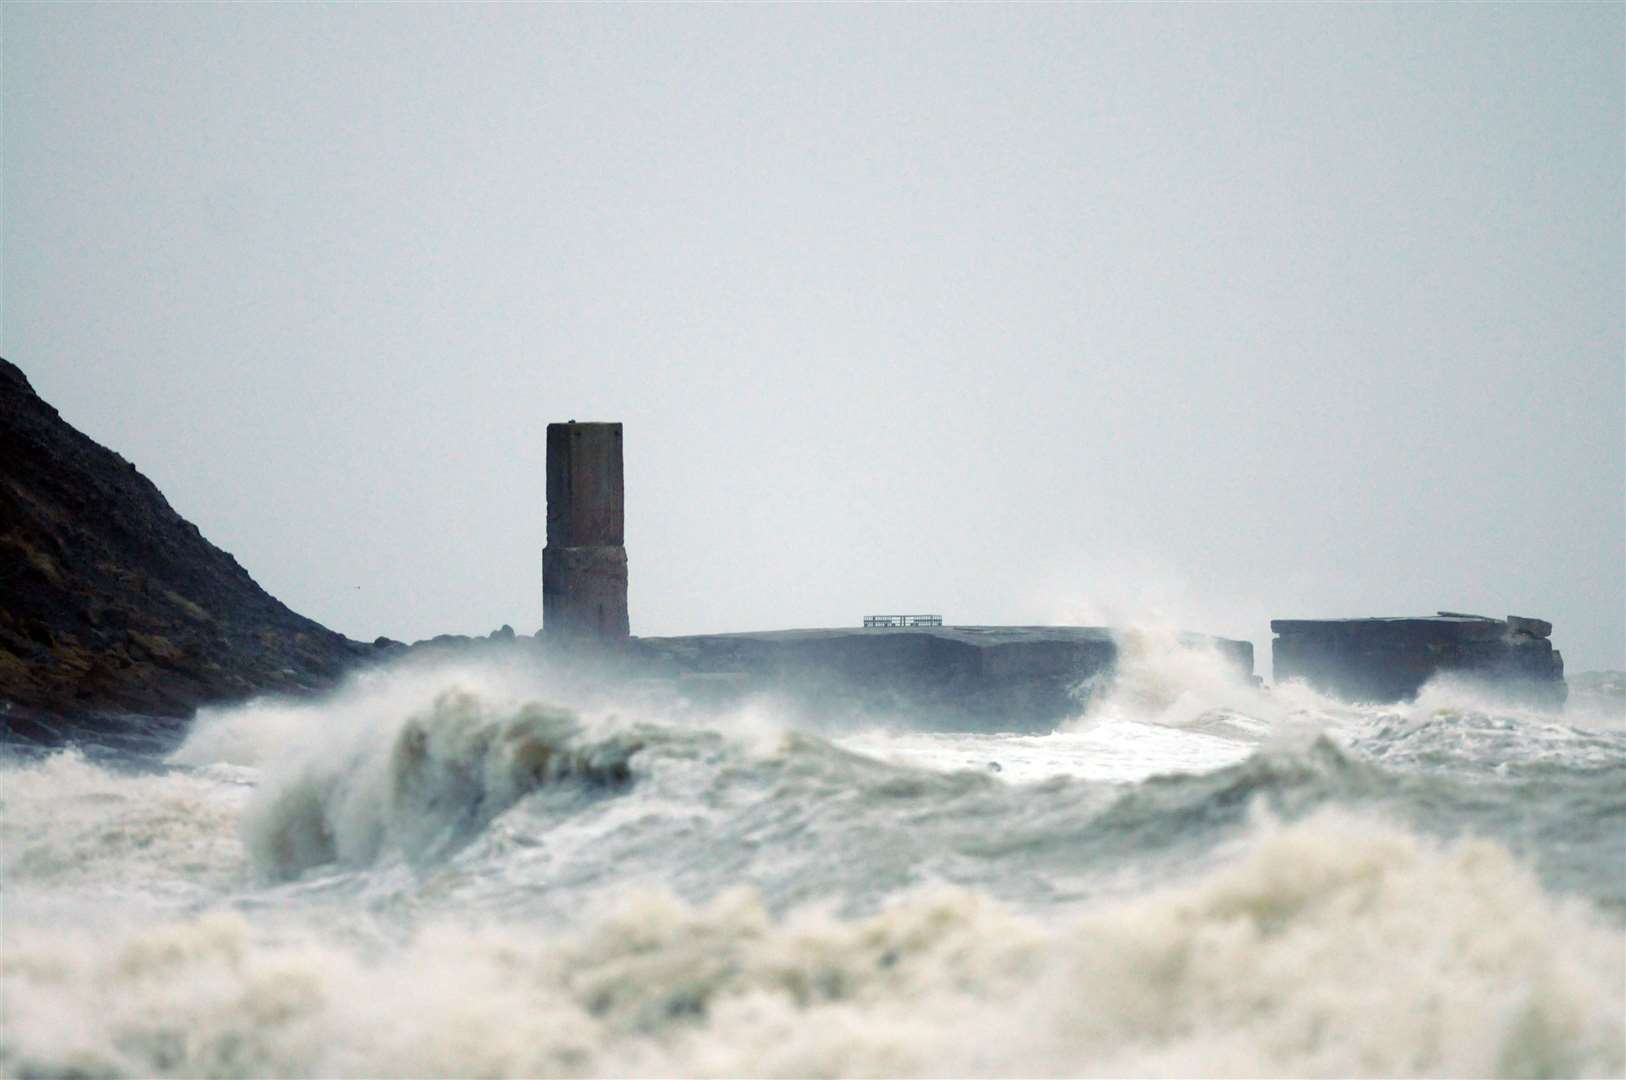 Windy conditions are expected to bring large waves. Library image